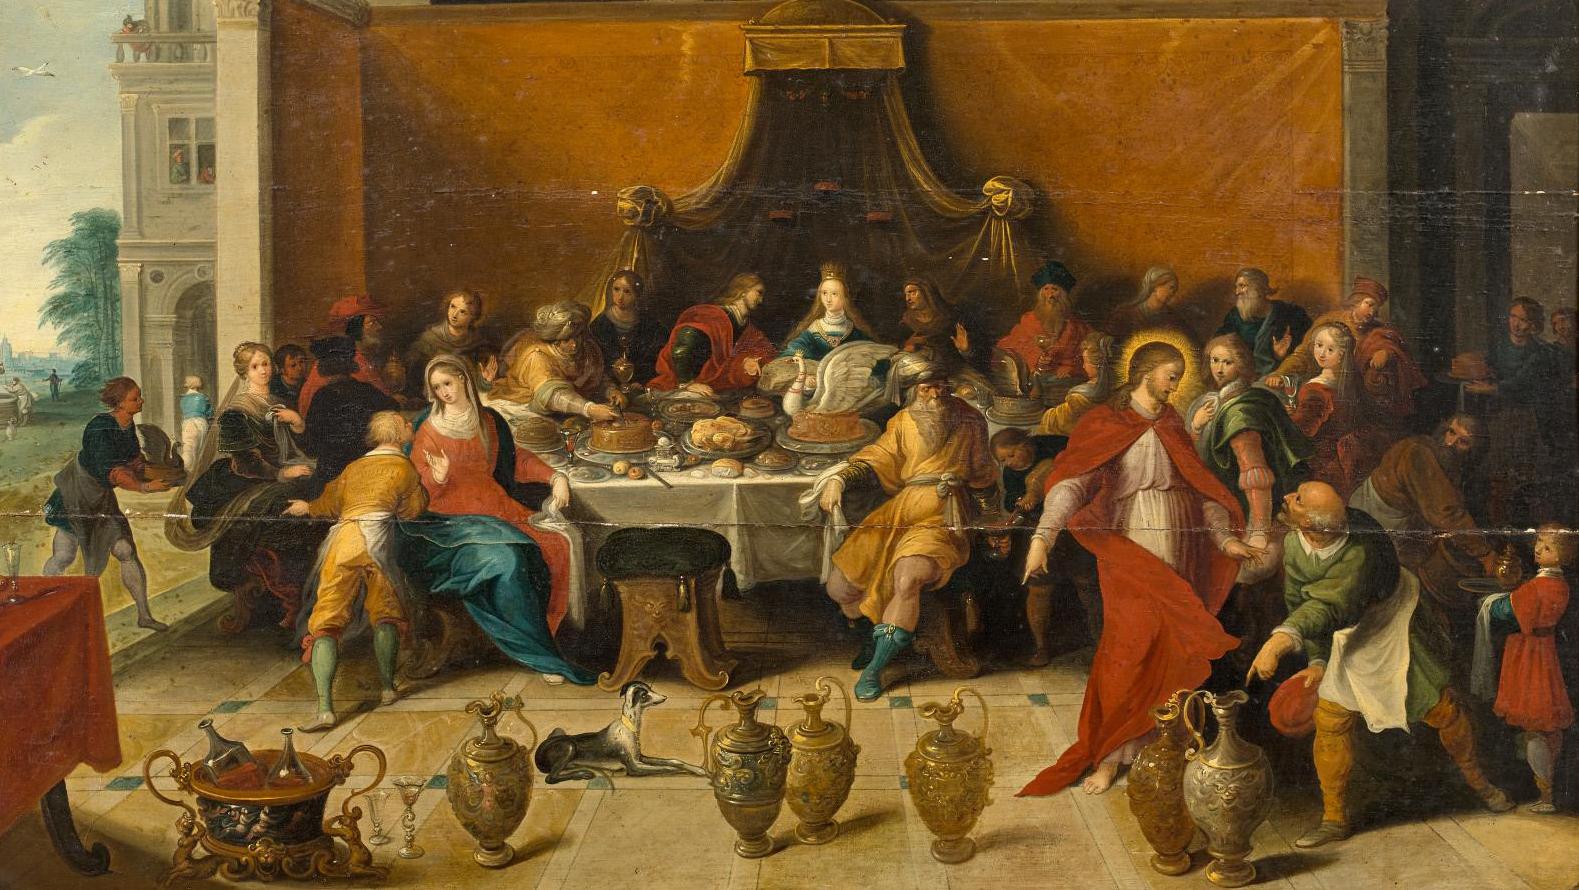 Flemish School, 17th century, studio of Frans II Francken (1581–1642), The Wedding... The Studio of Frans II Francken and the Wedding at Cana 